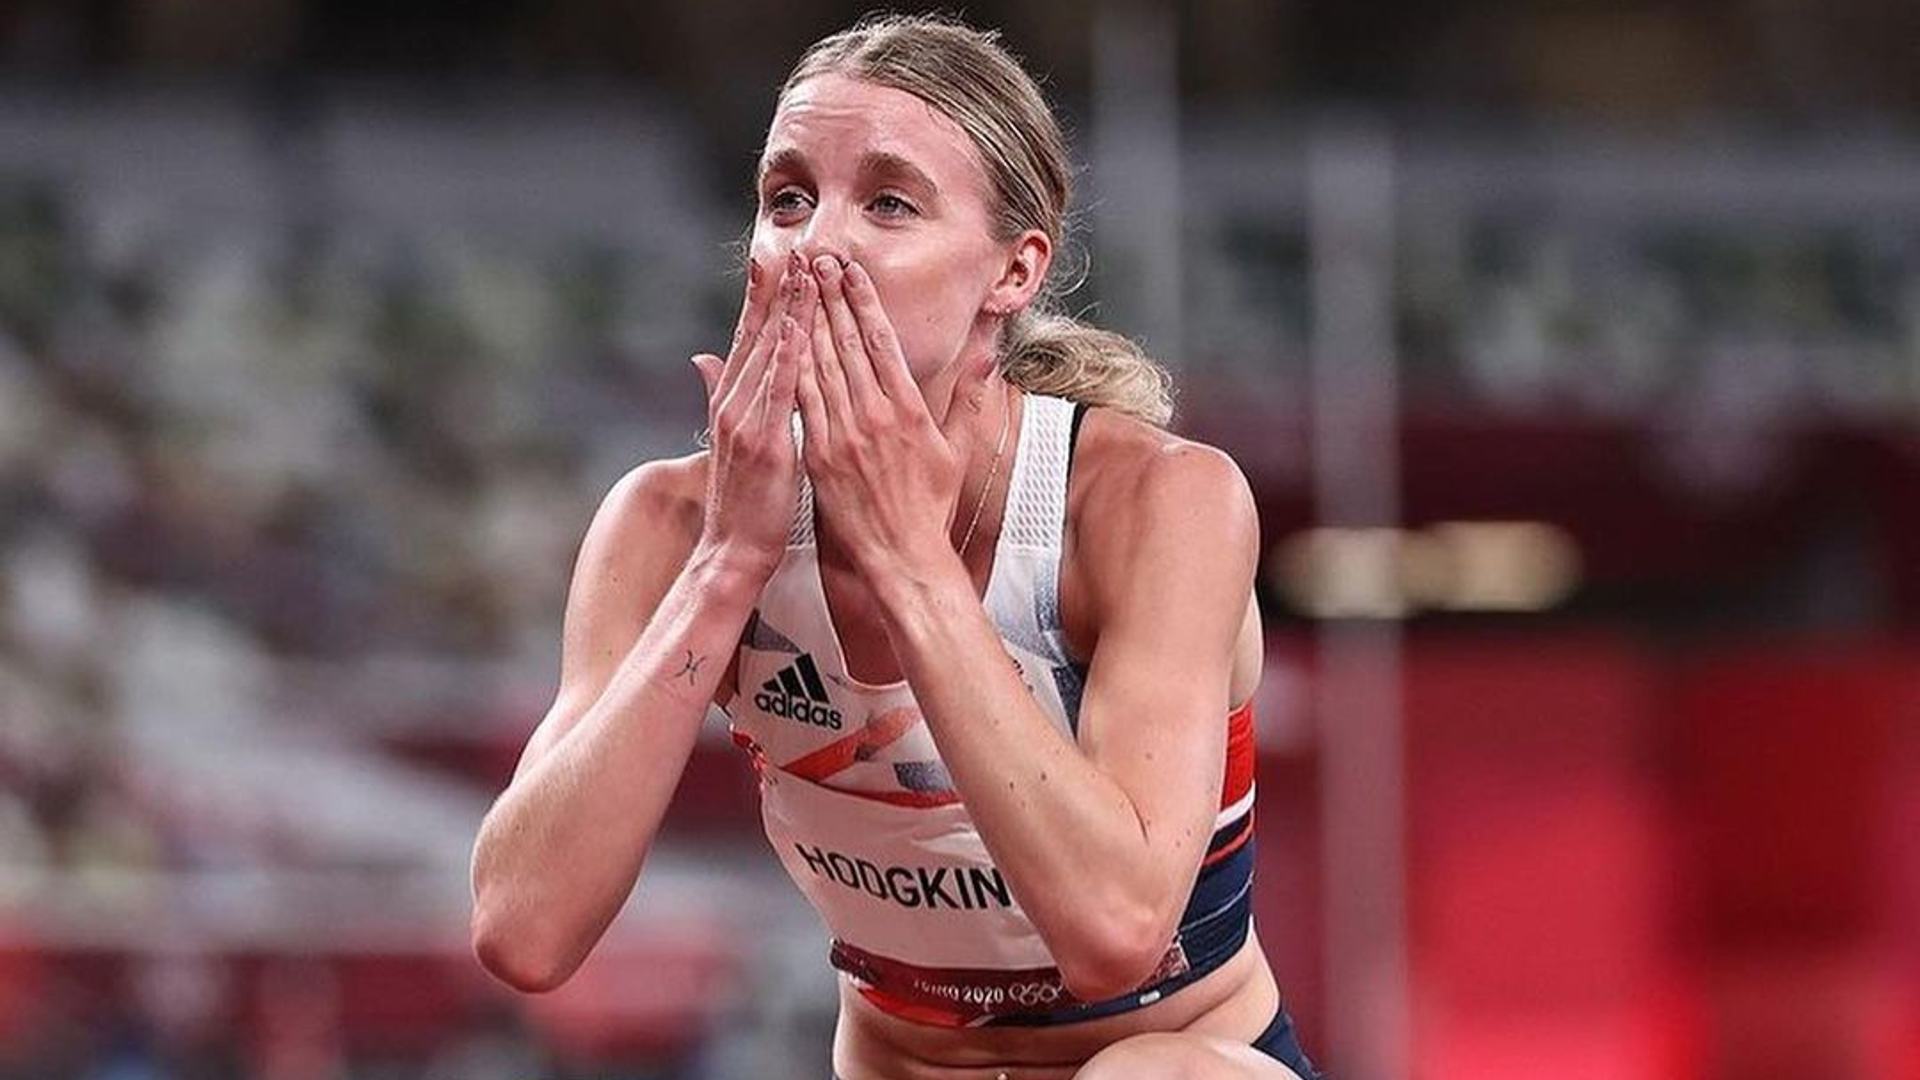 Keely Hodgkinson's reaction after winning the silver medal at the Tokyo Olympics 2020 (Image Credits - Instagram/ @keely.hodgkinson)